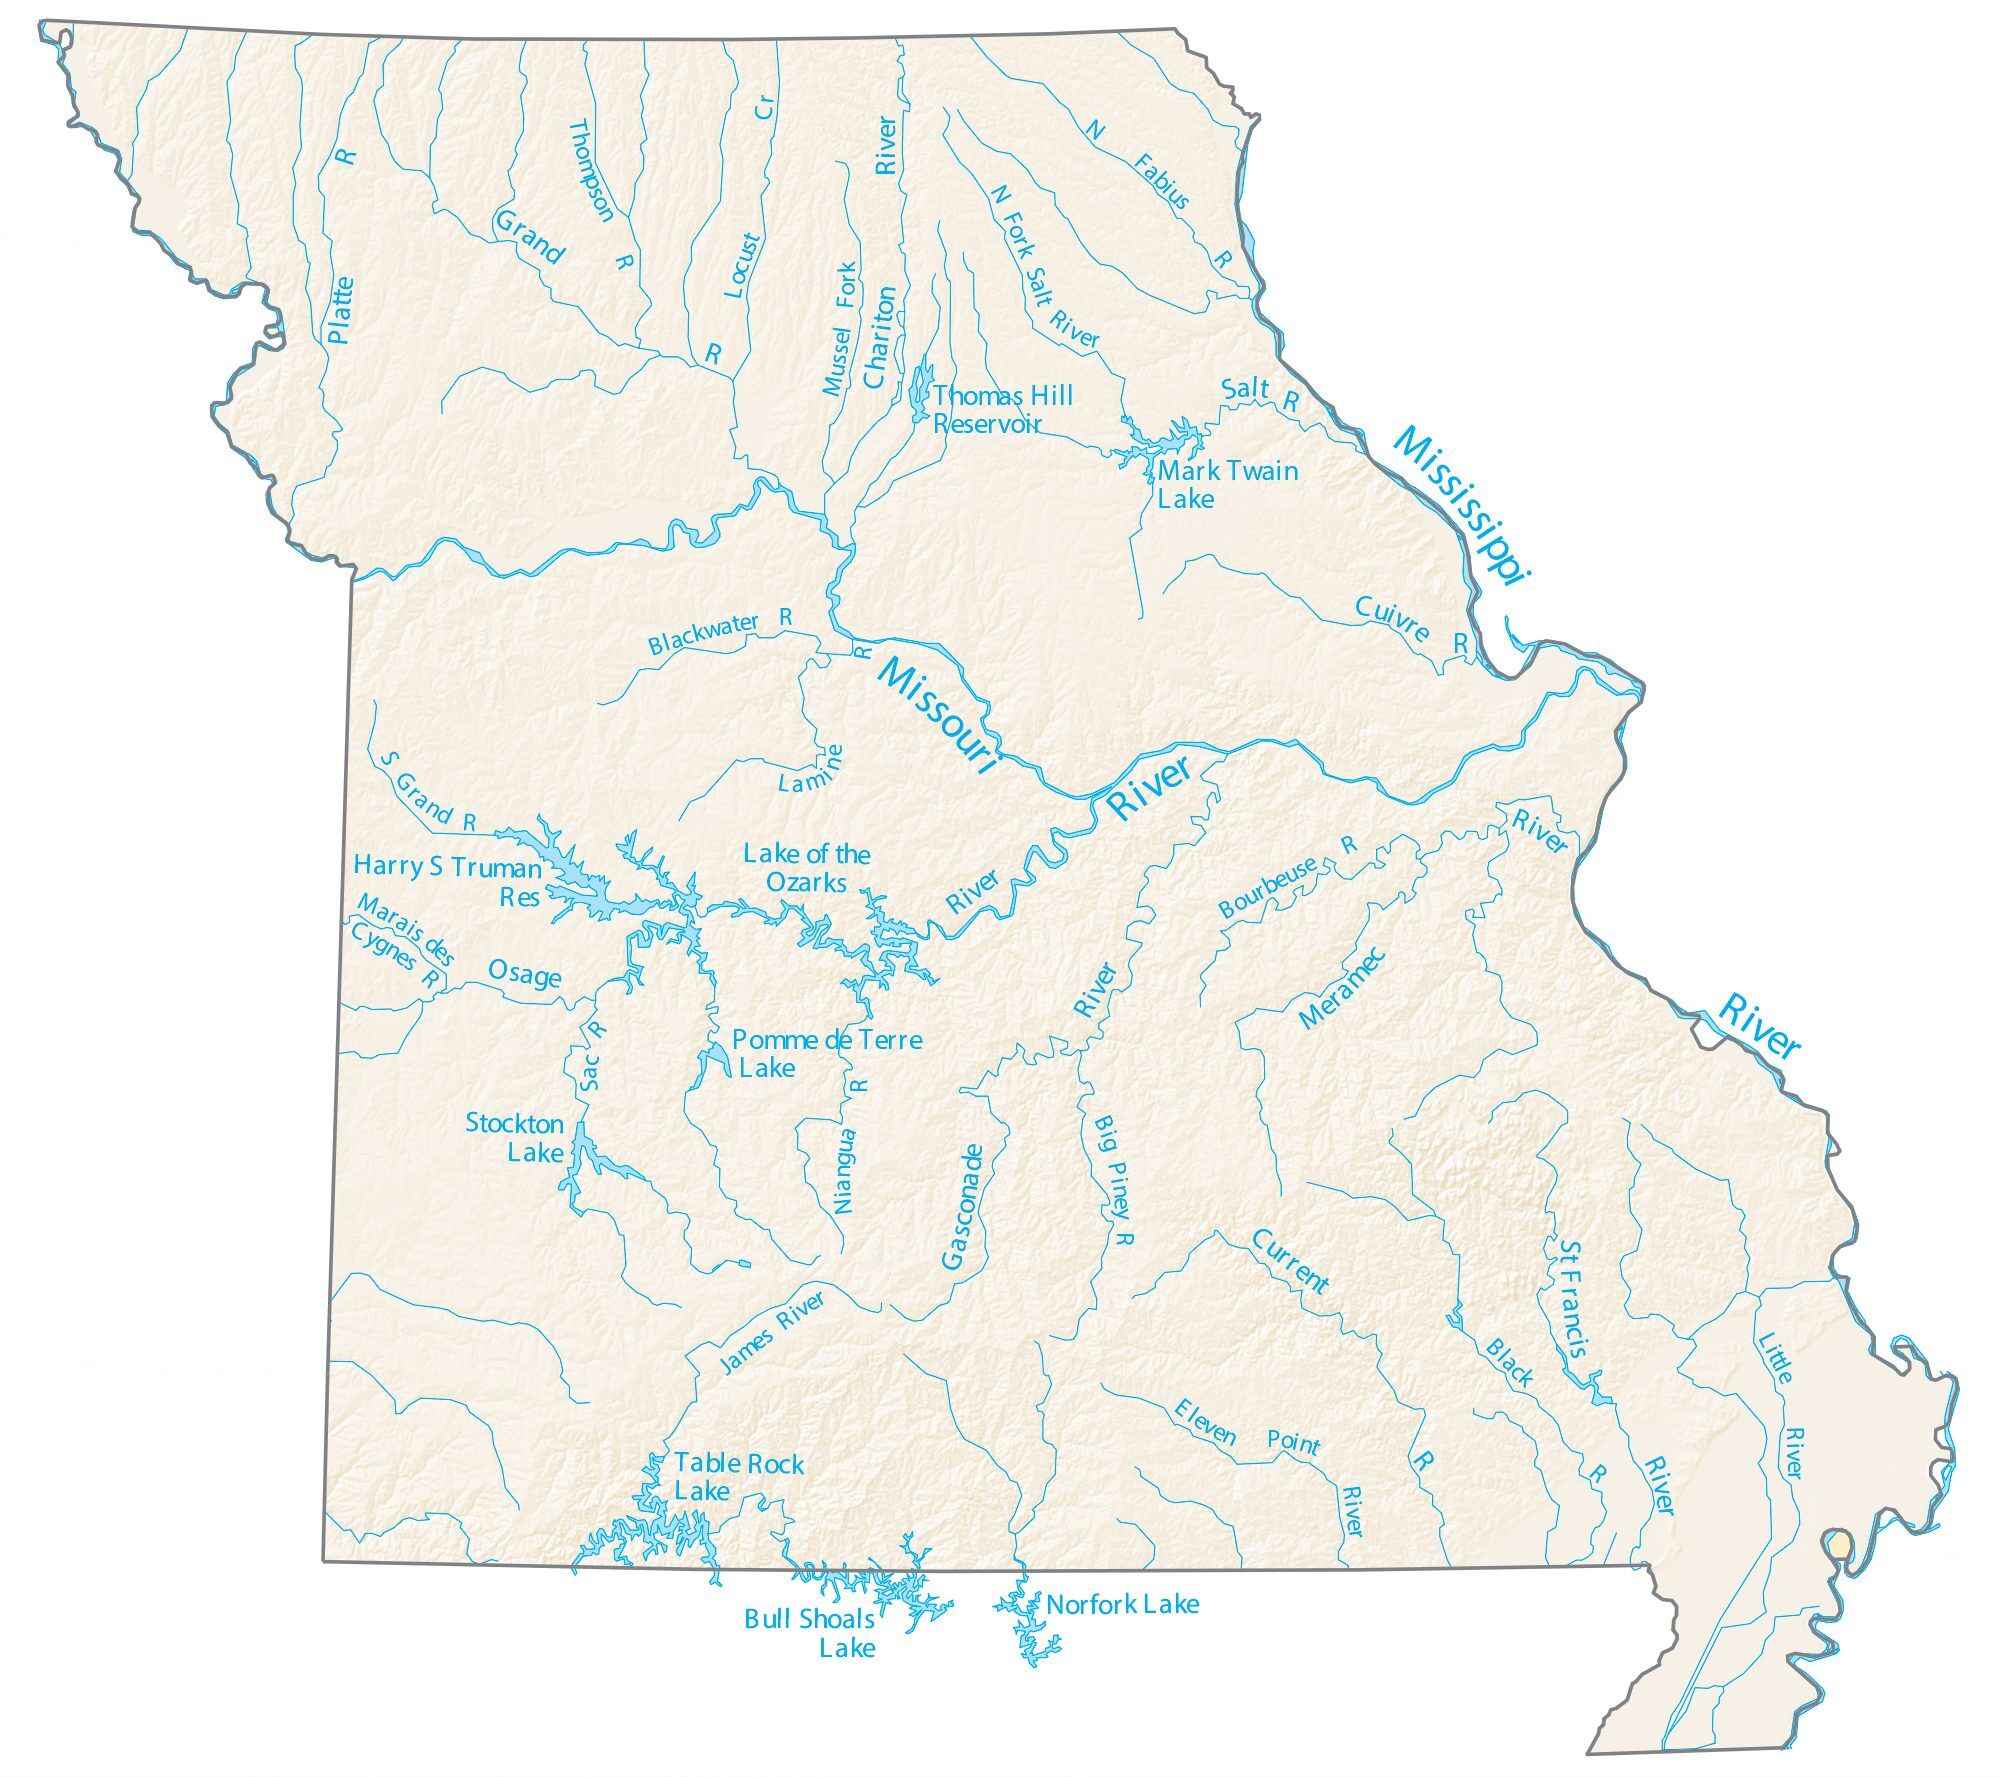 St Francois County Mo Gis Missouri Lakes And Rivers Map - Gis Geography